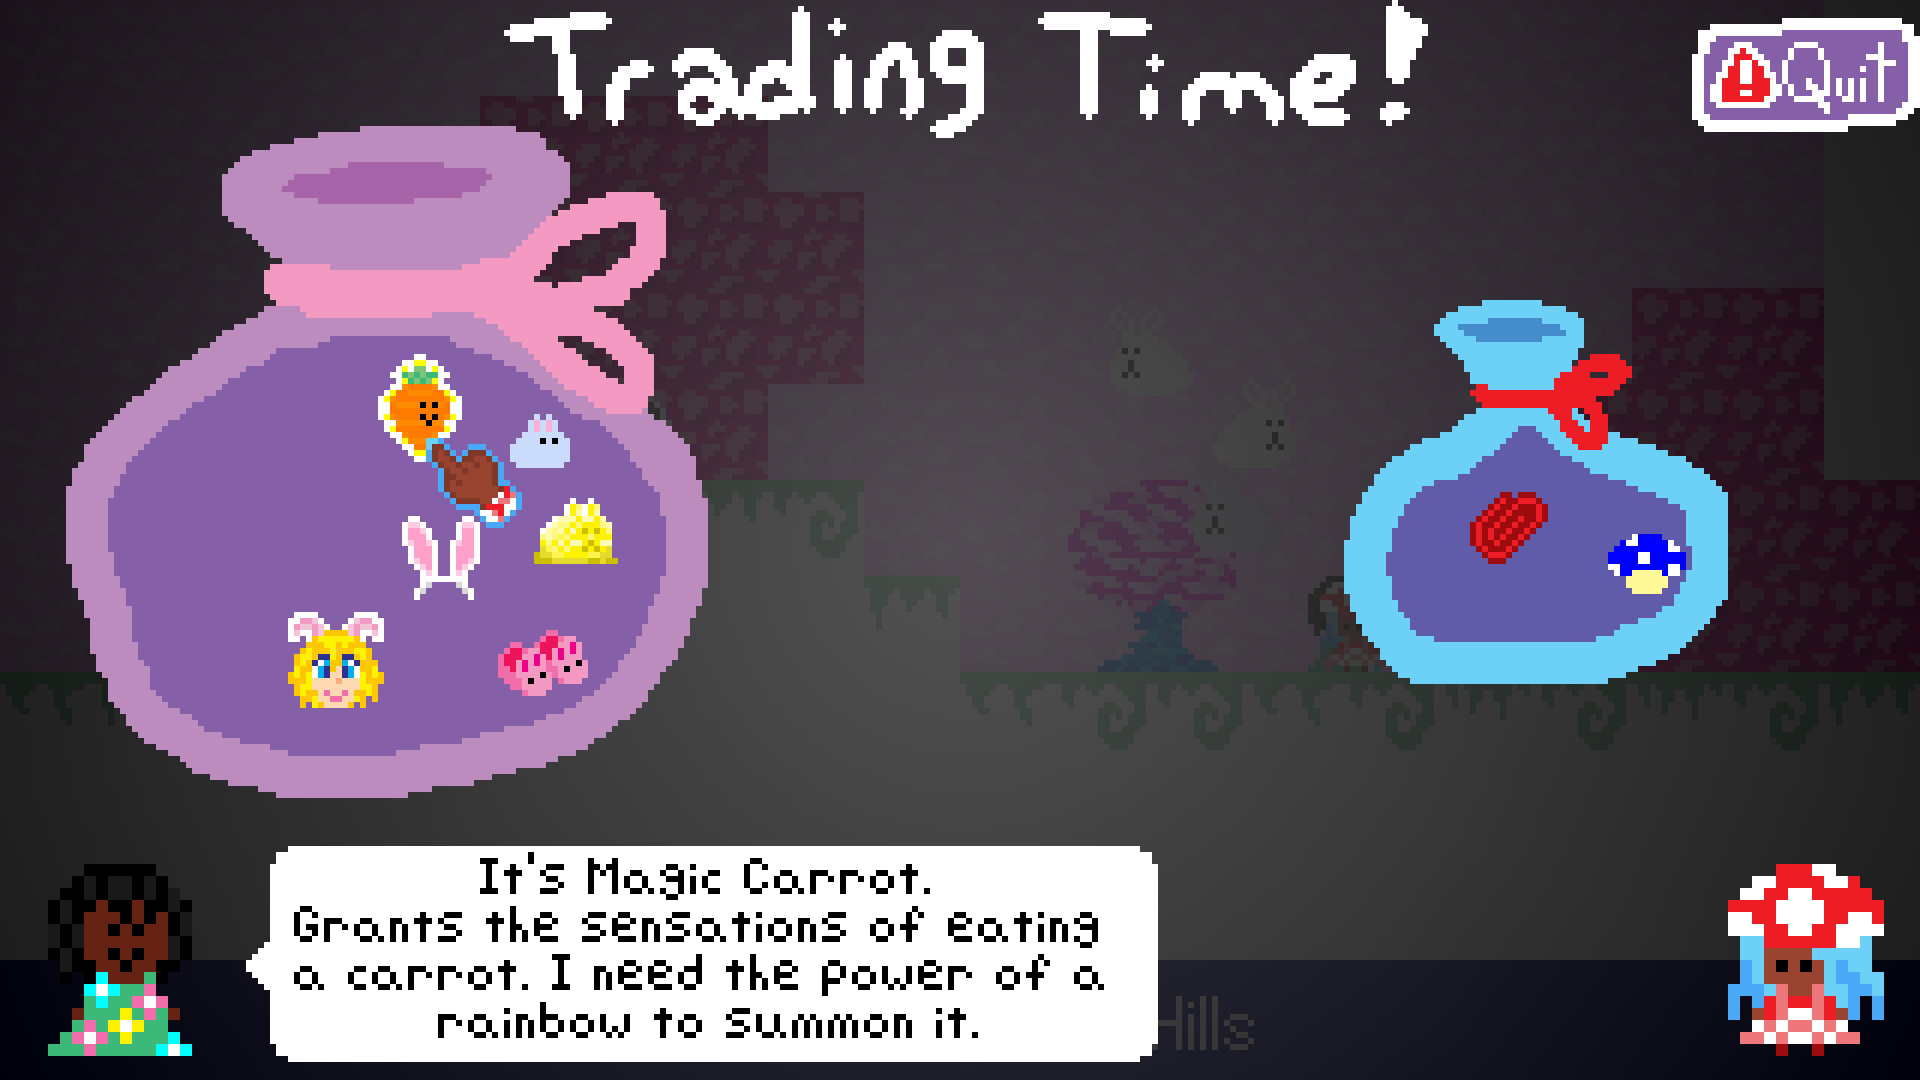 Clockwork Calamity in Mushroom World: What would you do if the time stopped ticking? Resimleri 